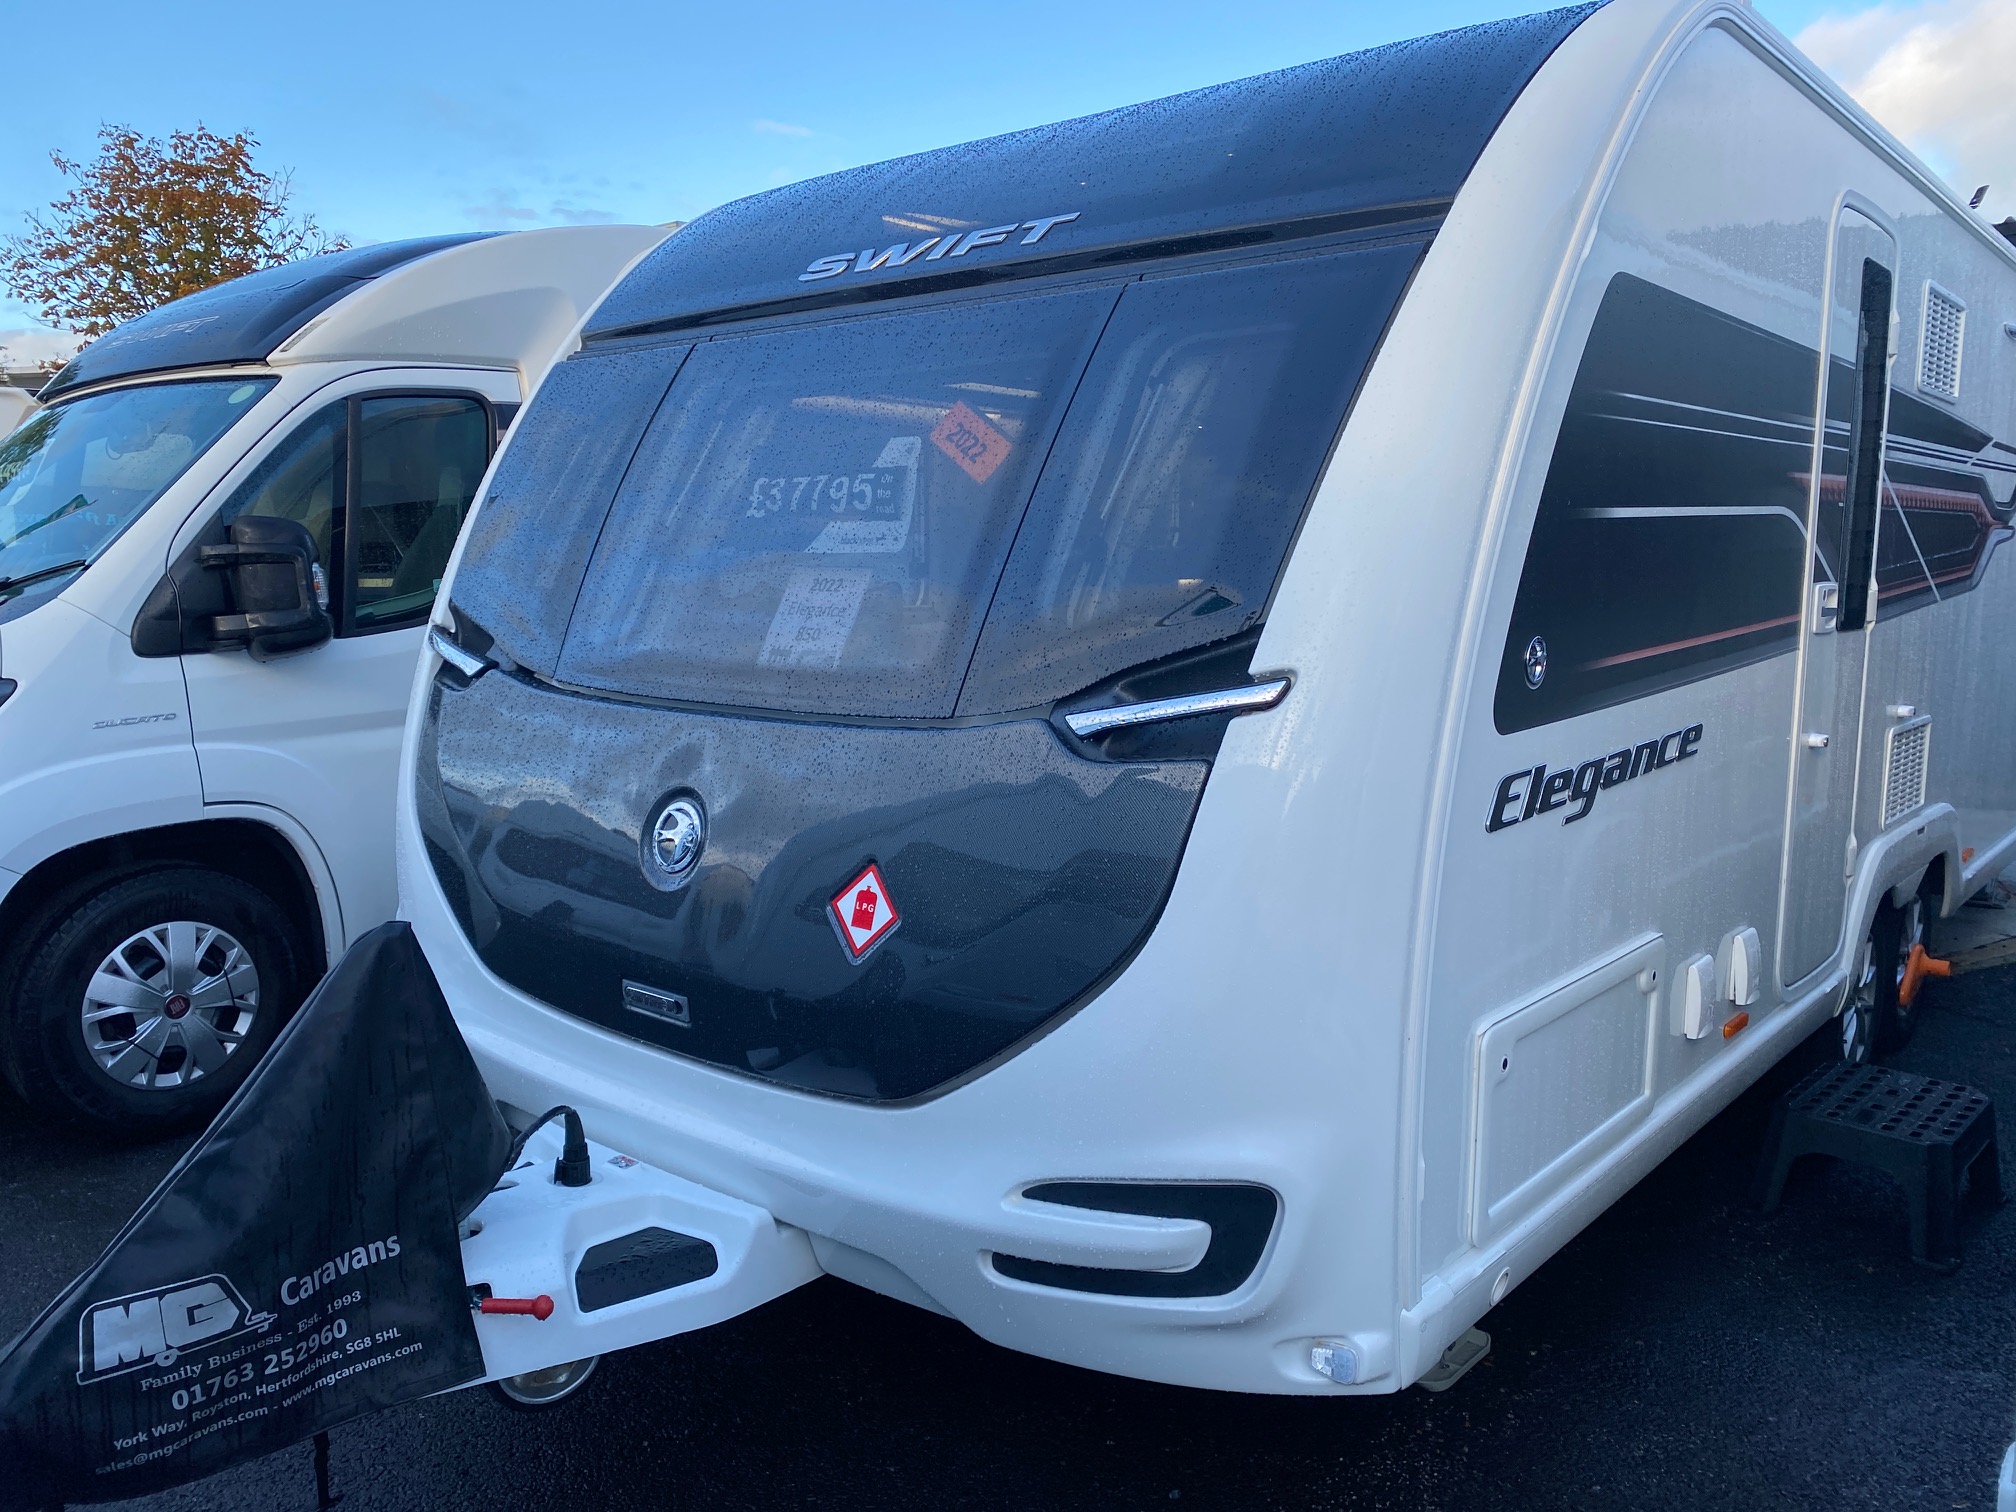 2022 Swift Elegance 850 – SOLD OUT